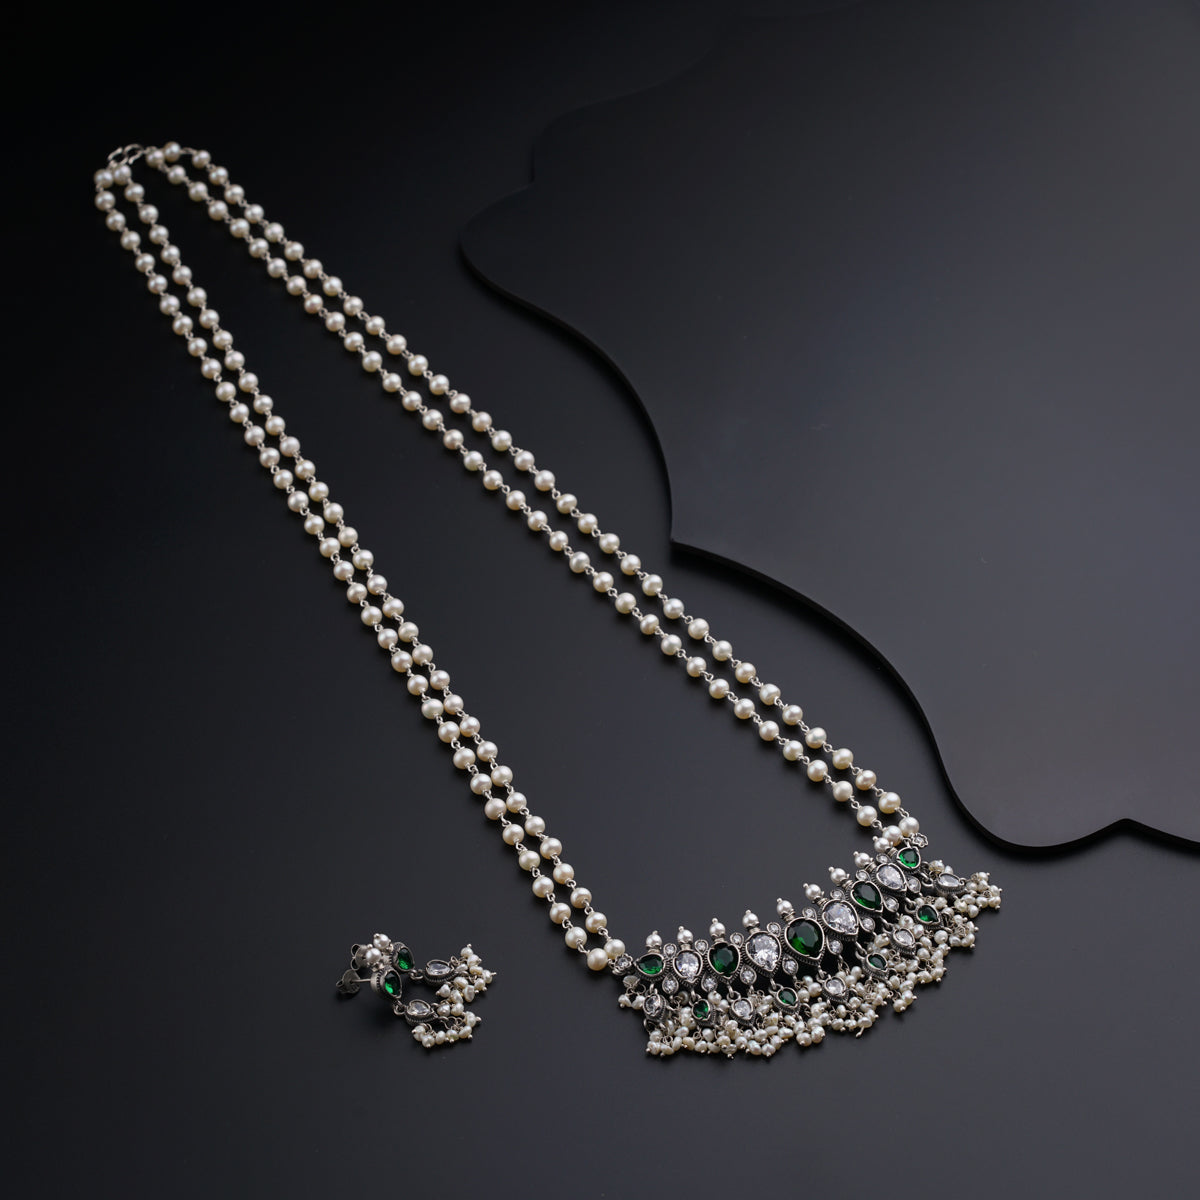 a necklace and earring set with pearls and emeralds